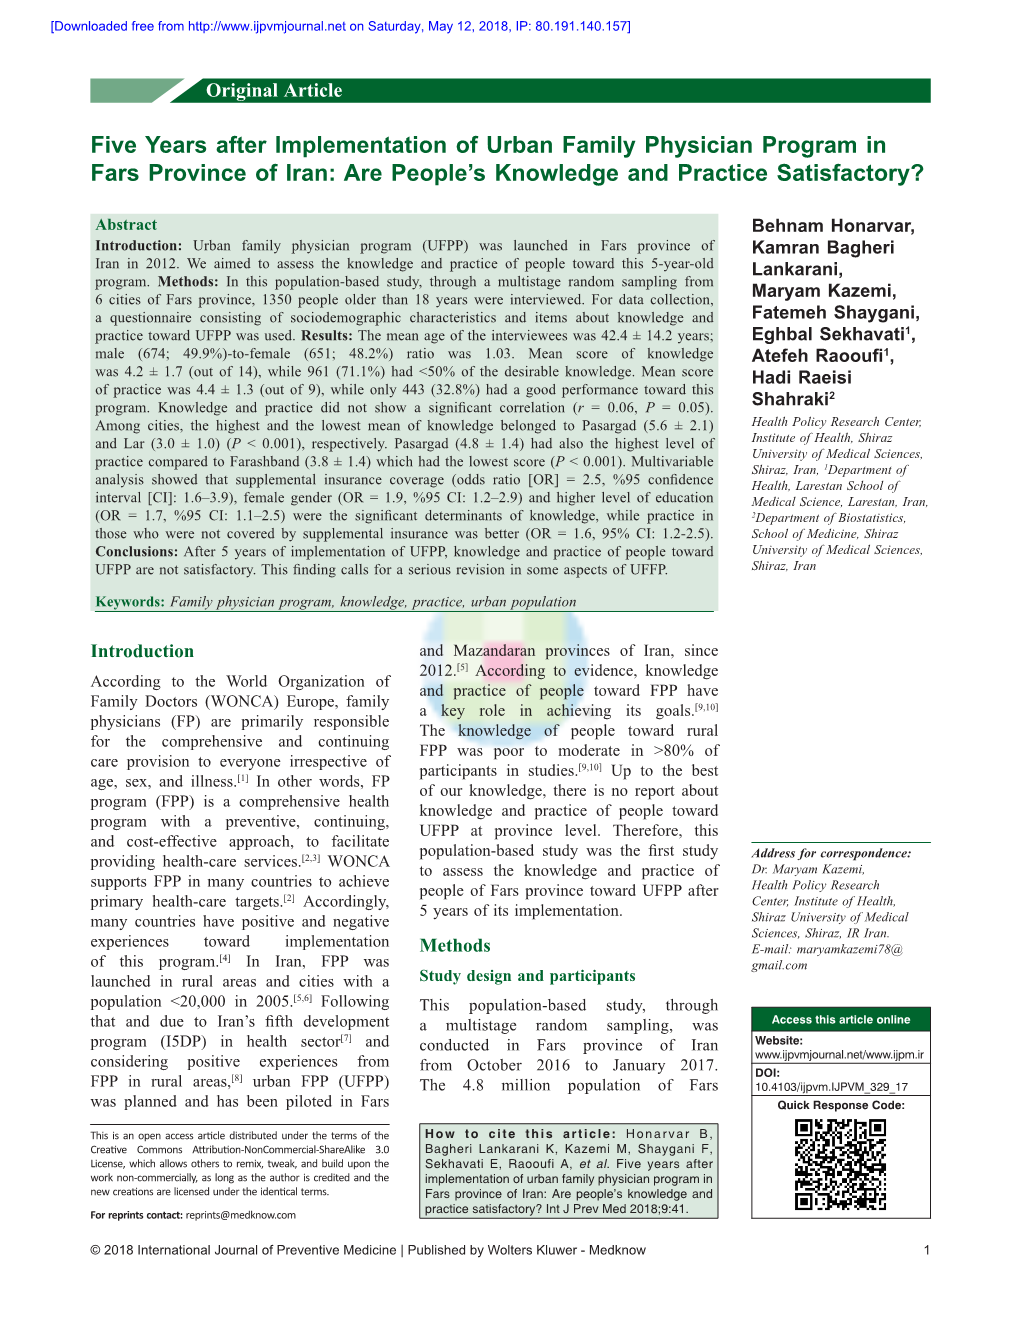 Five Years After Implementation of Urban Family Physician Program in Fars Province of Iran: Are People’S Knowledge and Practice Satisfactory?